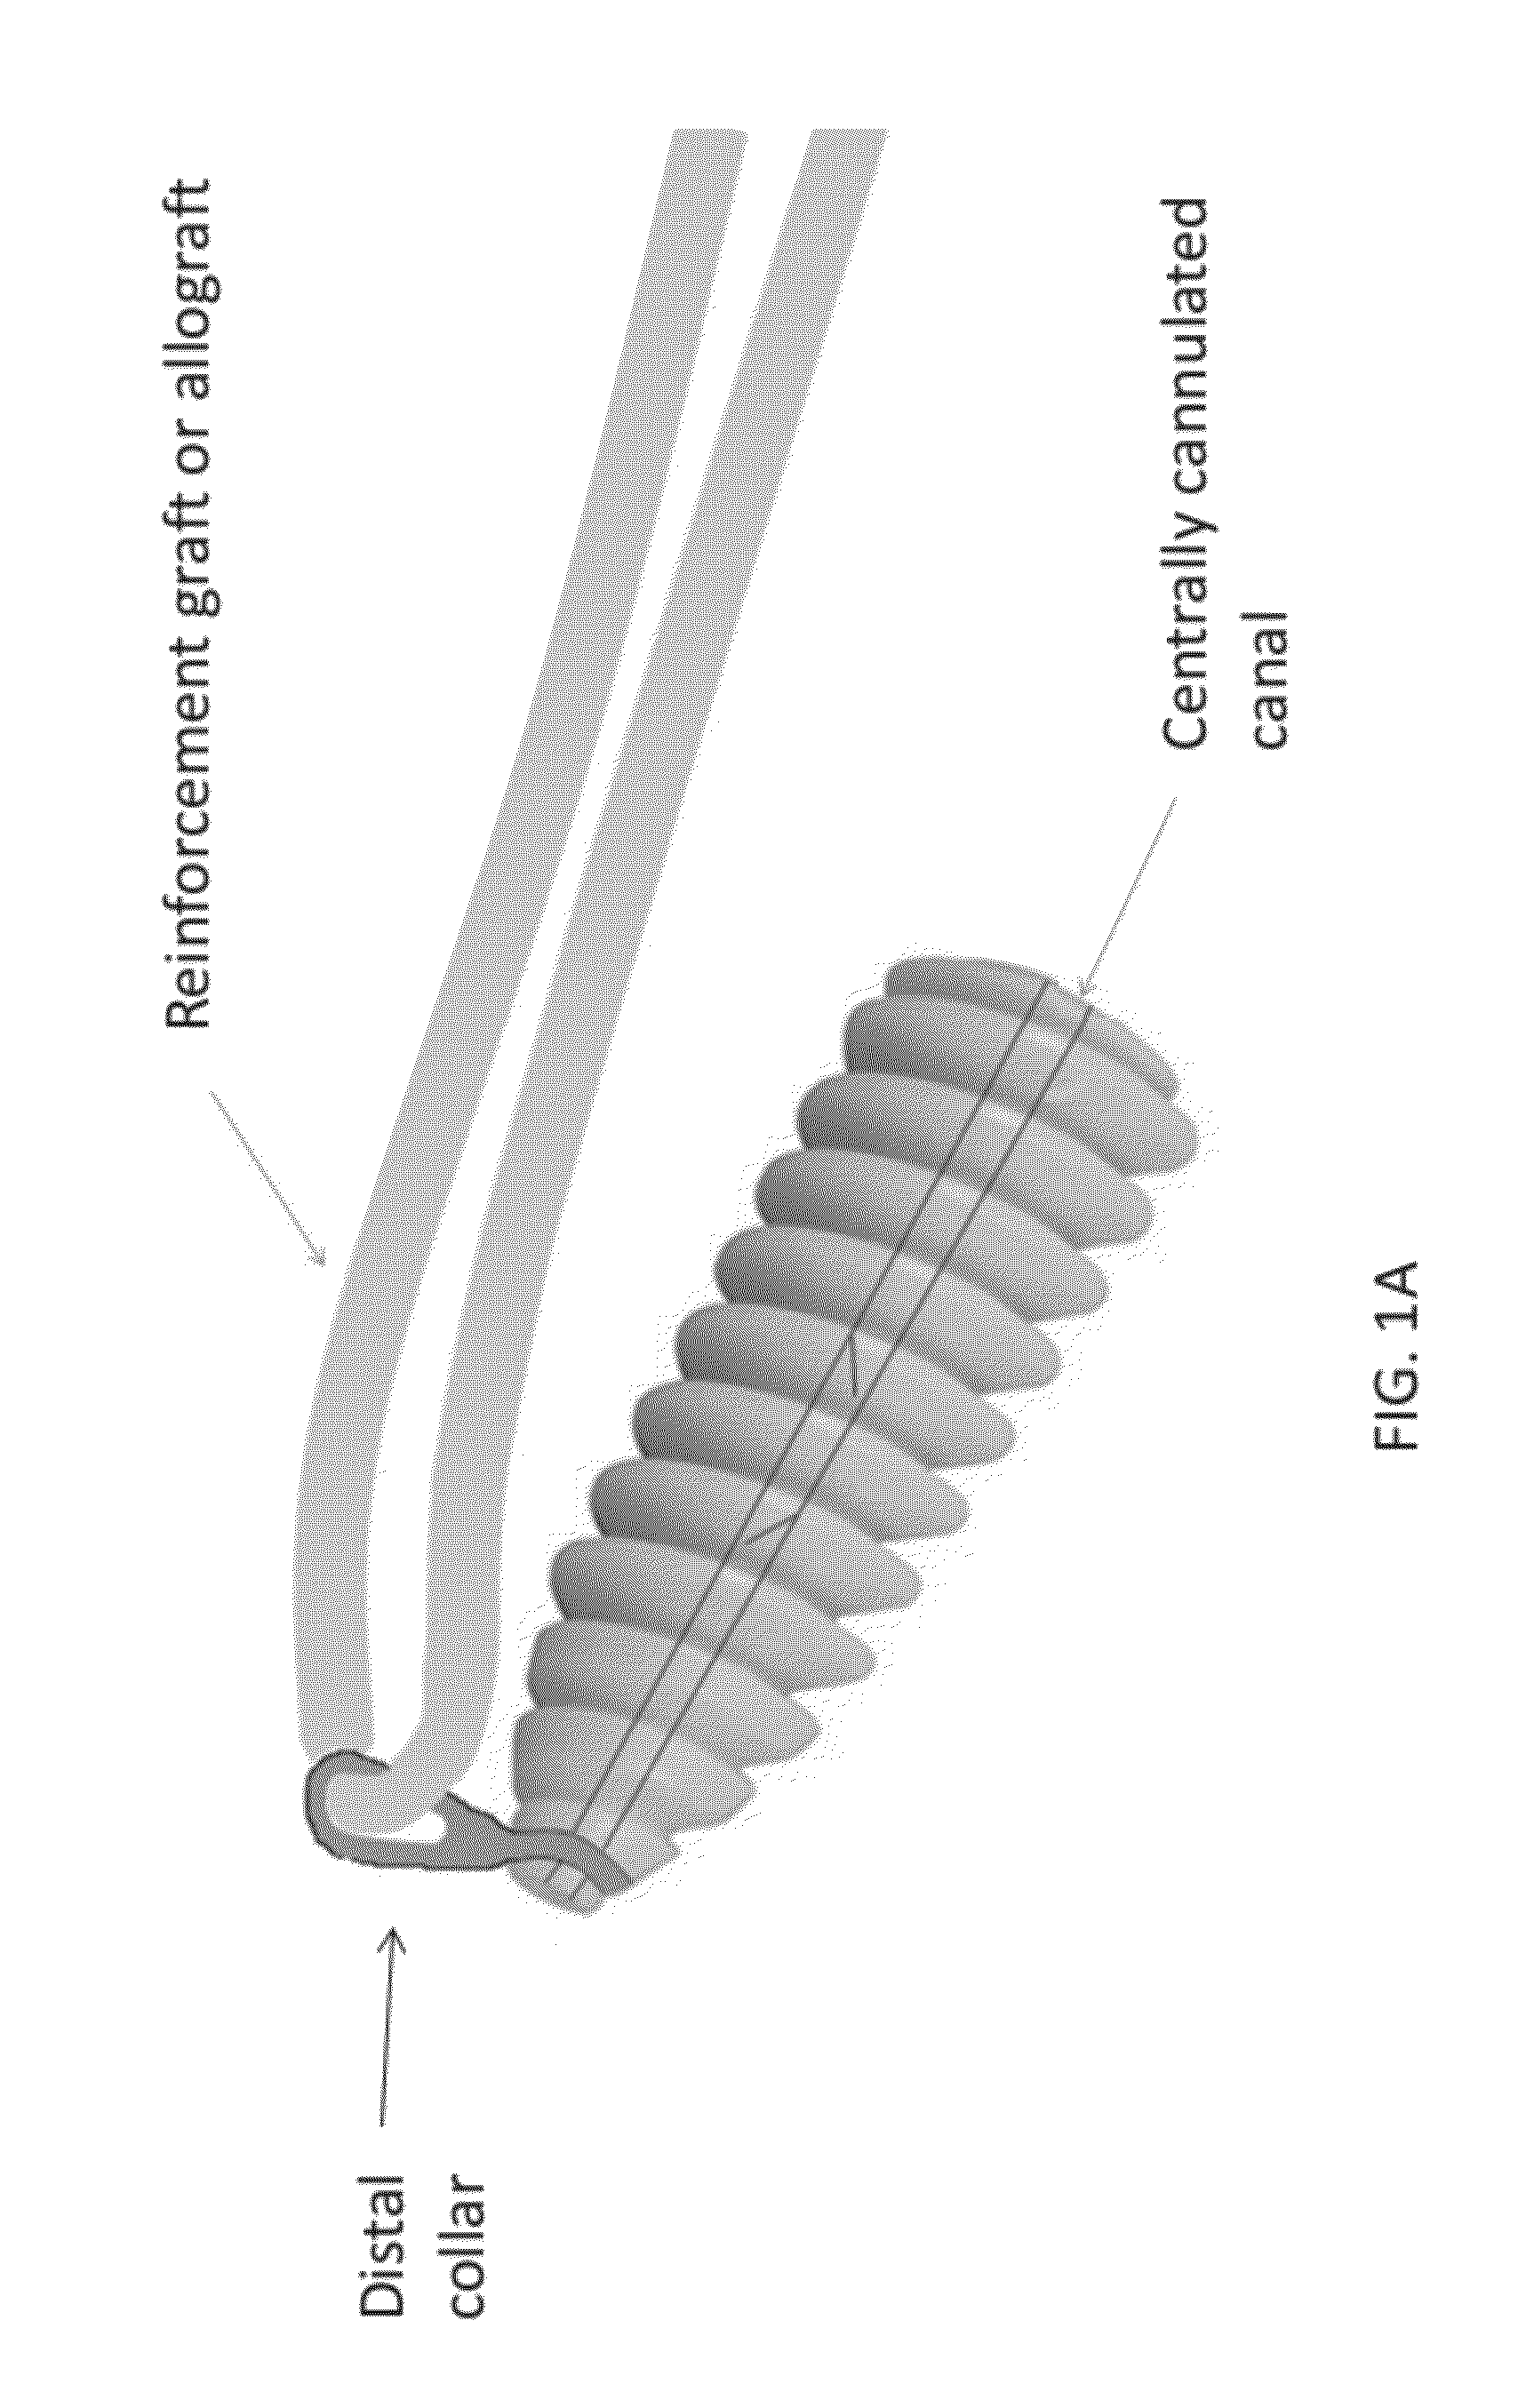 Implant and method for repair of the anterior cruciate ligament